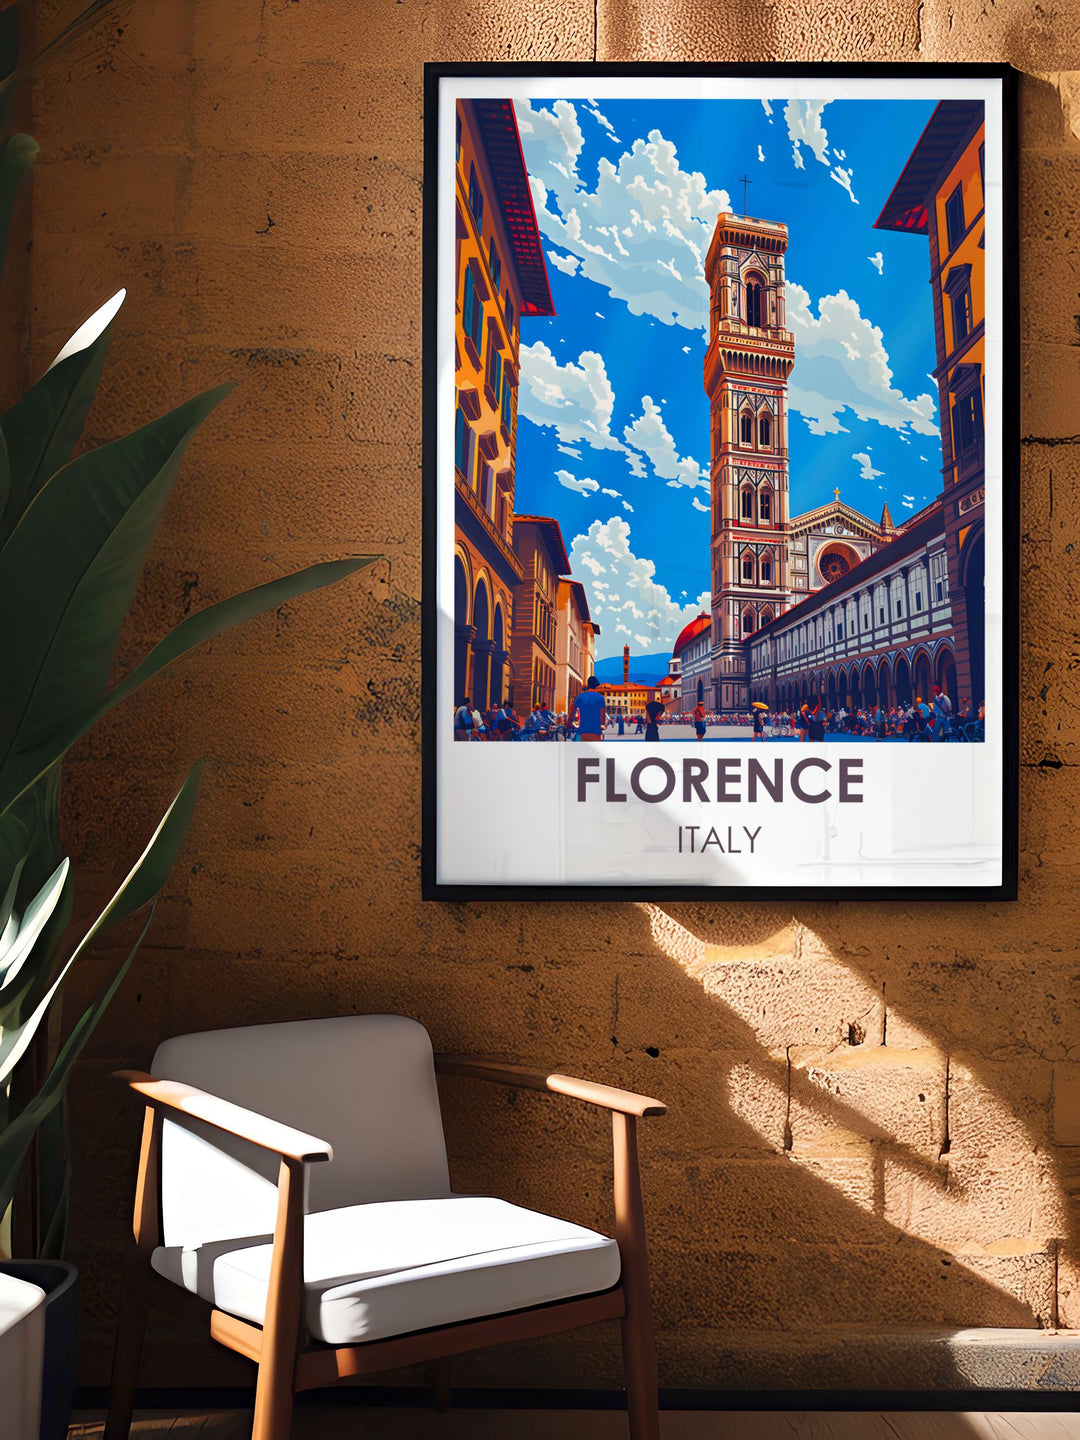 Gallery wall art showcasing the bustling Piazza della Signoria, offering a picturesque view of Florences Renaissance landmarks.